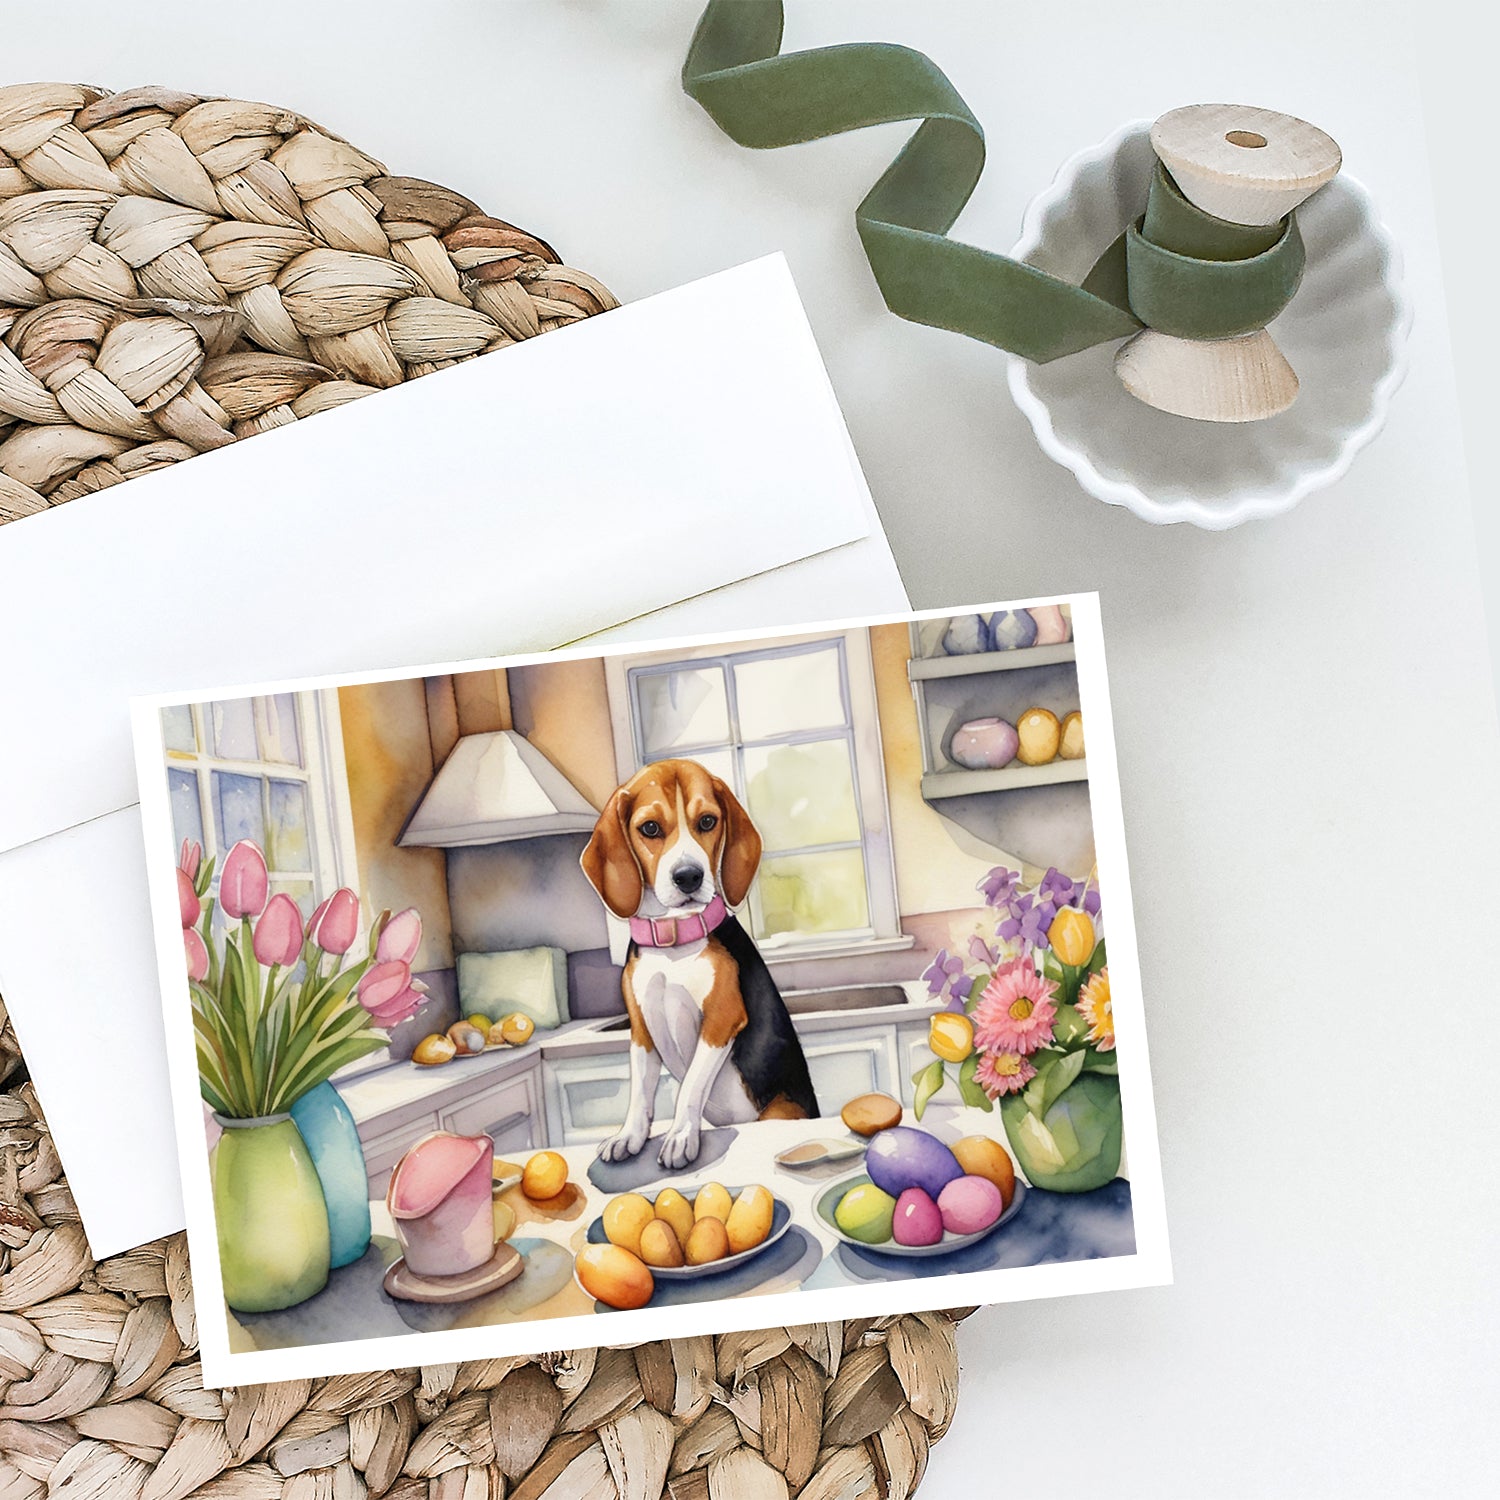 Buy this Decorating Easter Beagle Greeting Cards Pack of 8